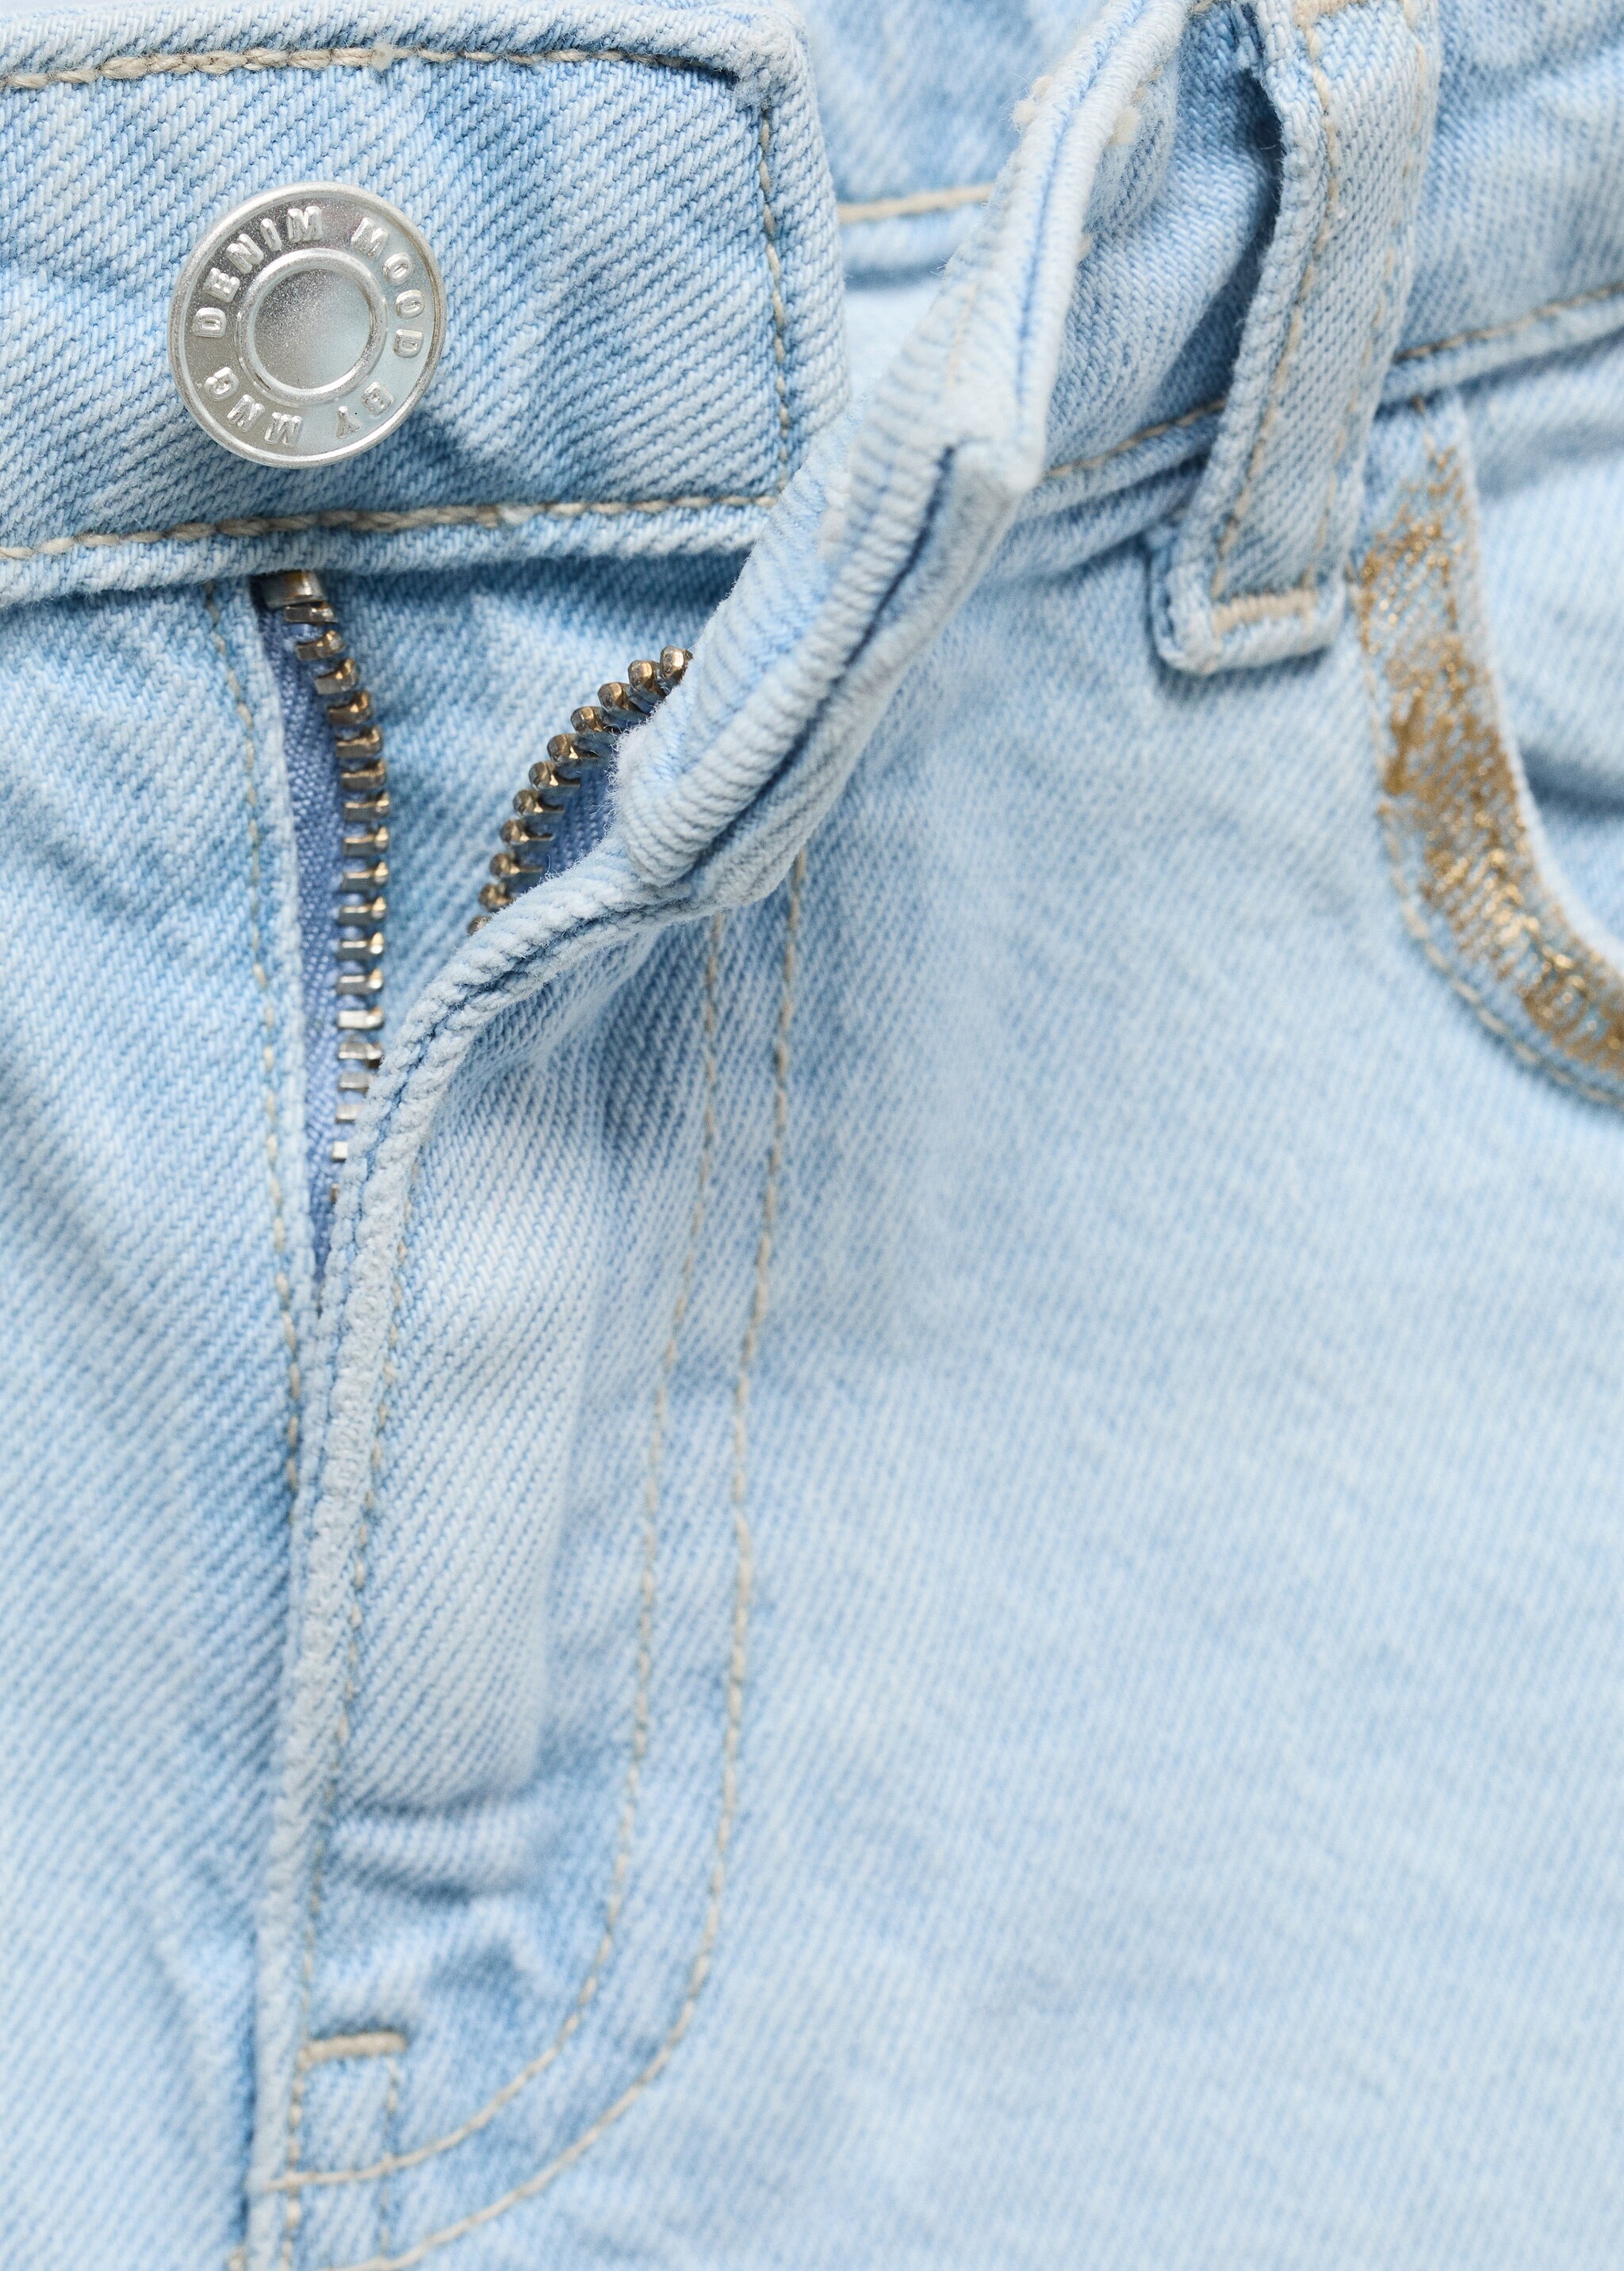 Denim shorts with frayed hem - Details of the article 8